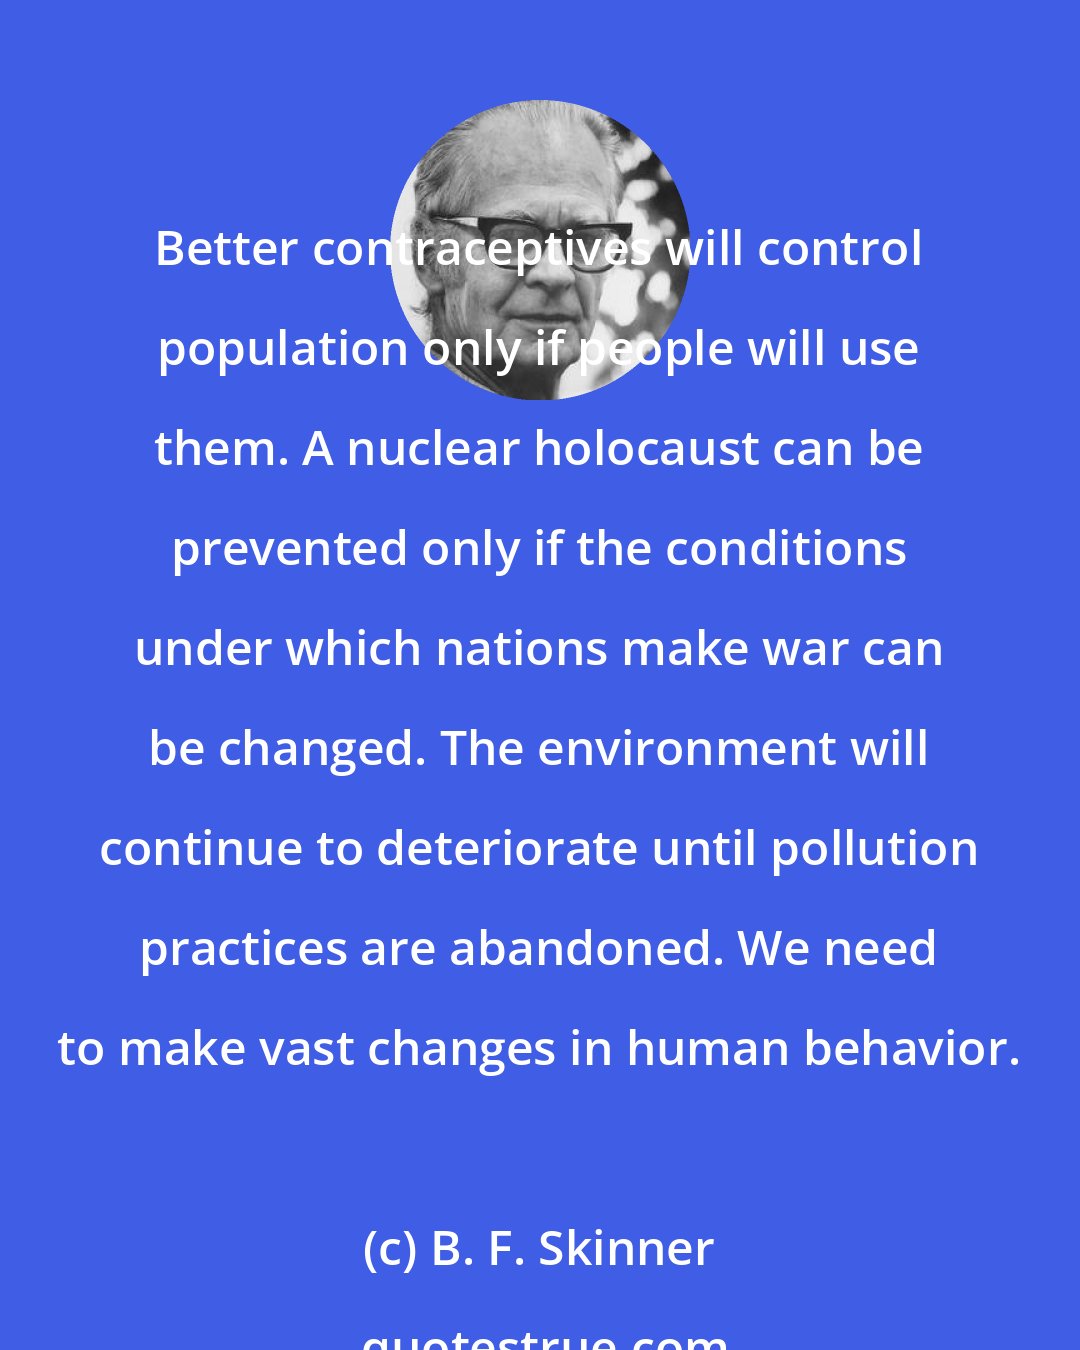 B. F. Skinner: Better contraceptives will control population only if people will use them. A nuclear holocaust can be prevented only if the conditions under which nations make war can be changed. The environment will continue to deteriorate until pollution practices are abandoned. We need to make vast changes in human behavior.